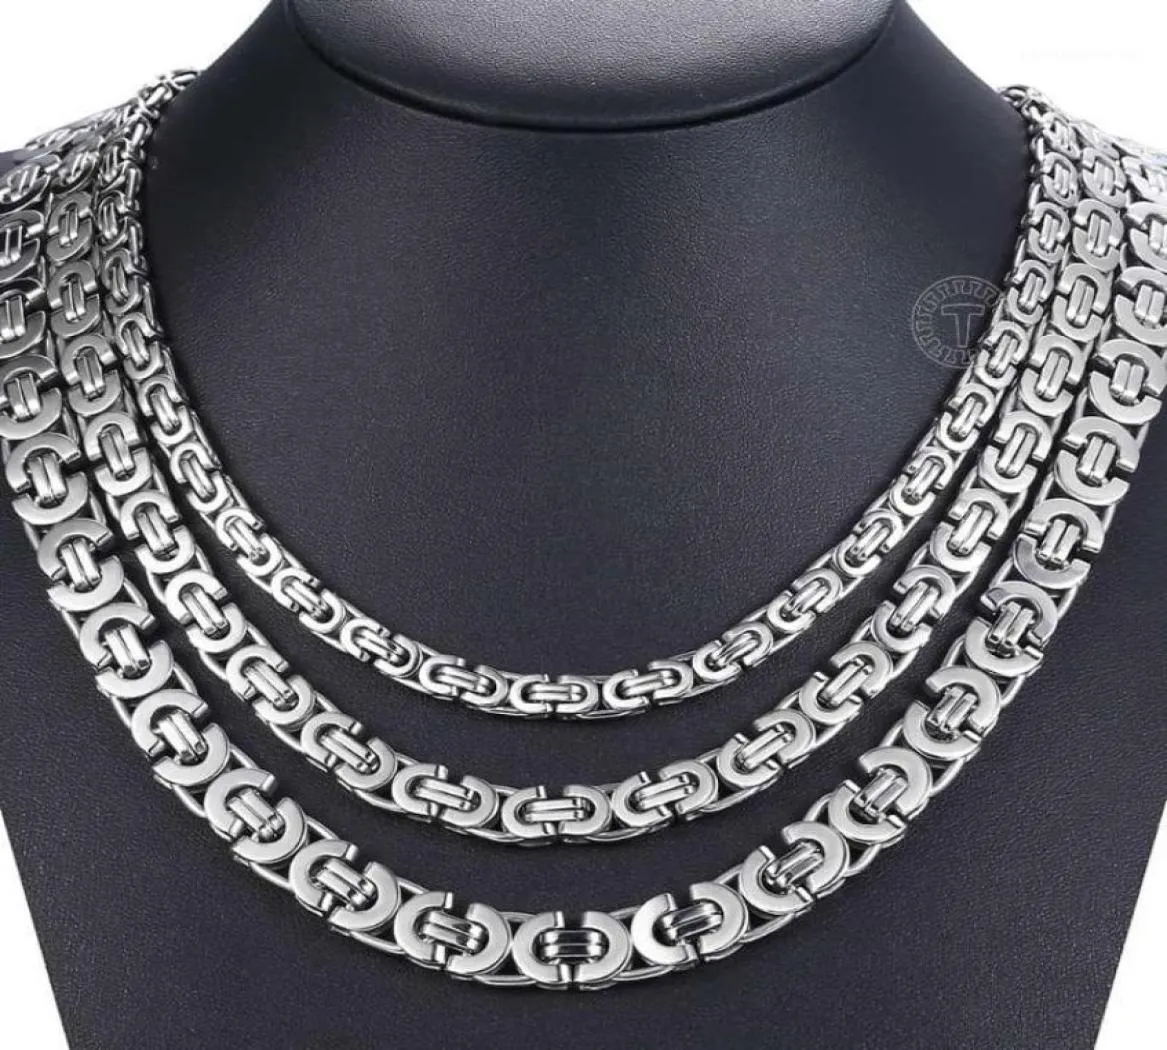 Chains 7911mm Stainless Steel Necklace For Men Women Flat Byzantine Link Chain Fashion Jewelry Gifts LKNN144950106